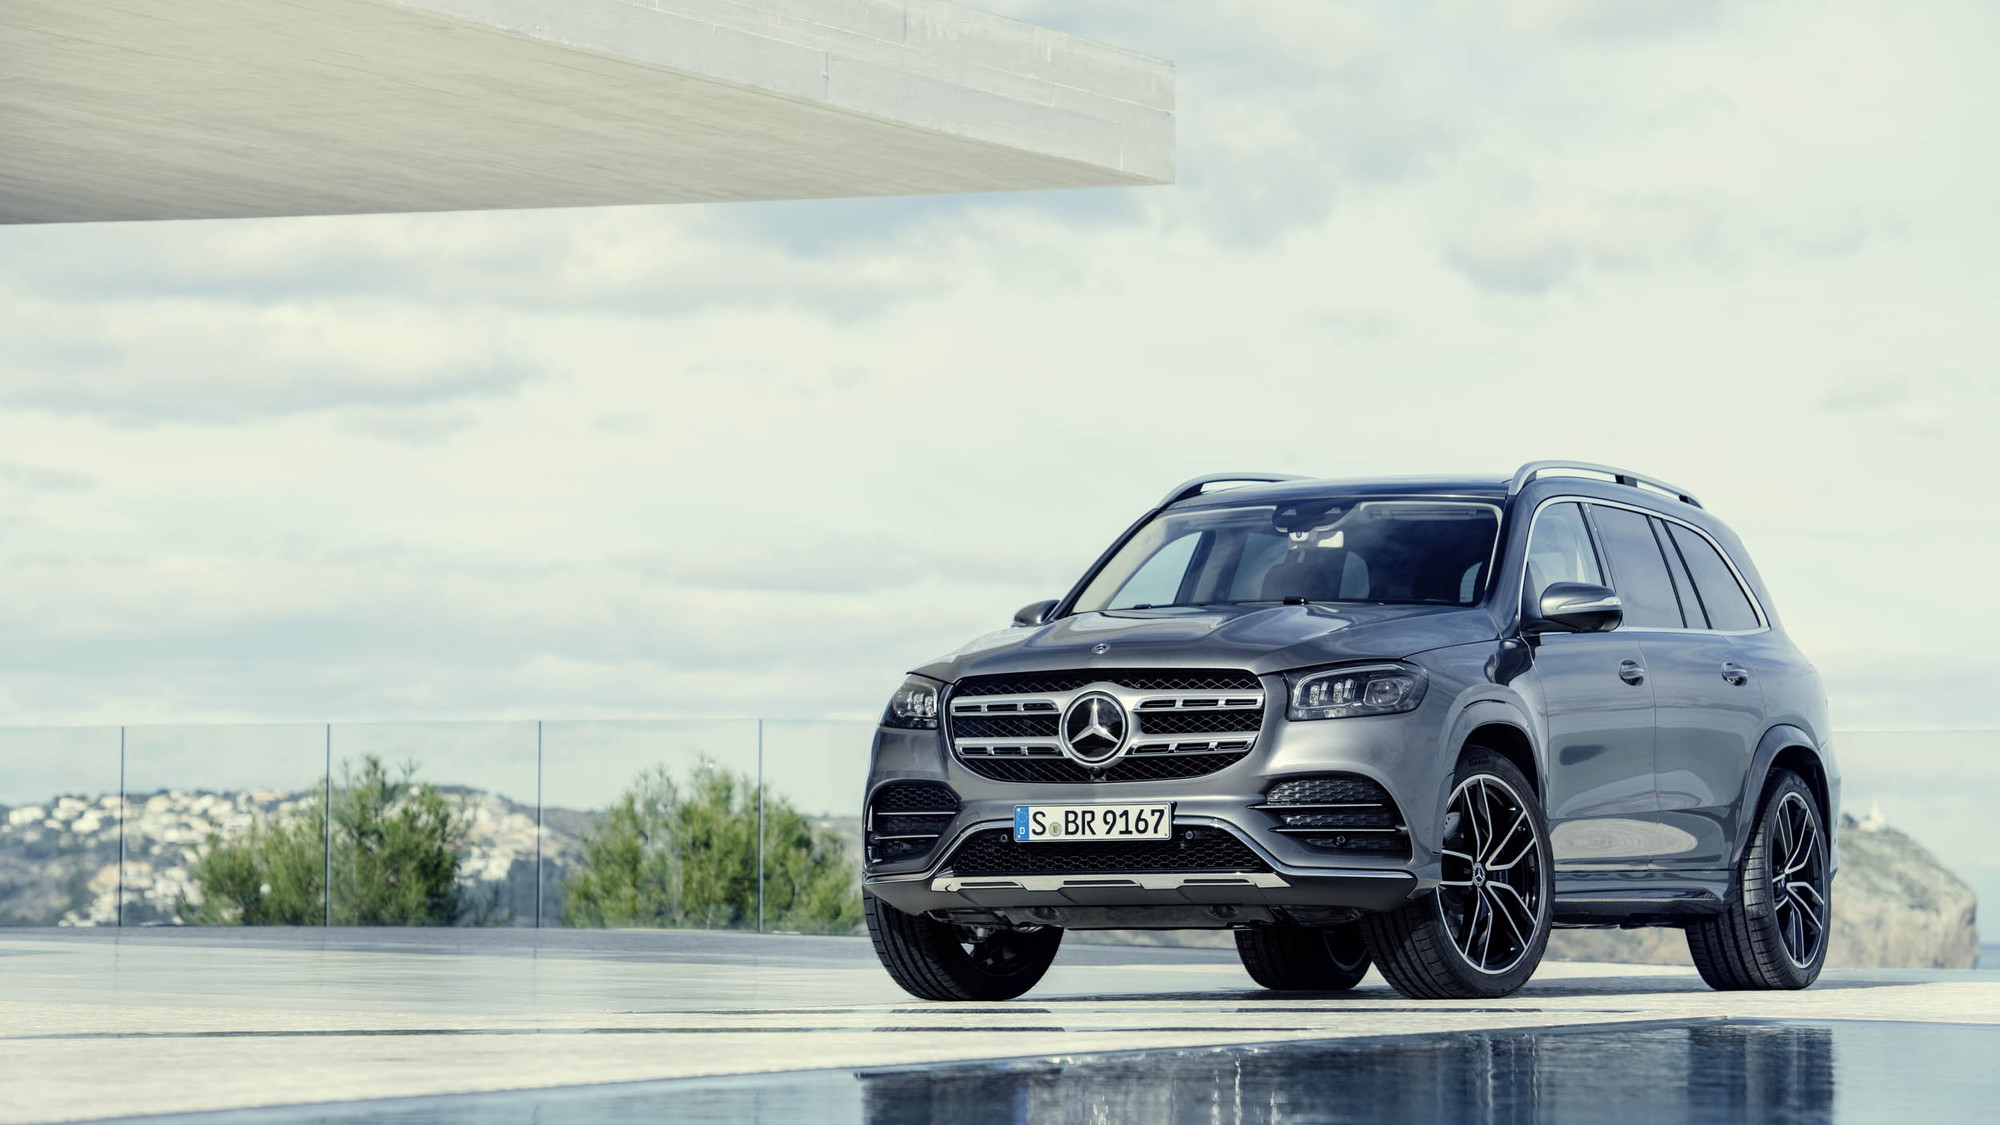 2020 Mercedes-Benz GLS aims to be the S-Class of SUVs